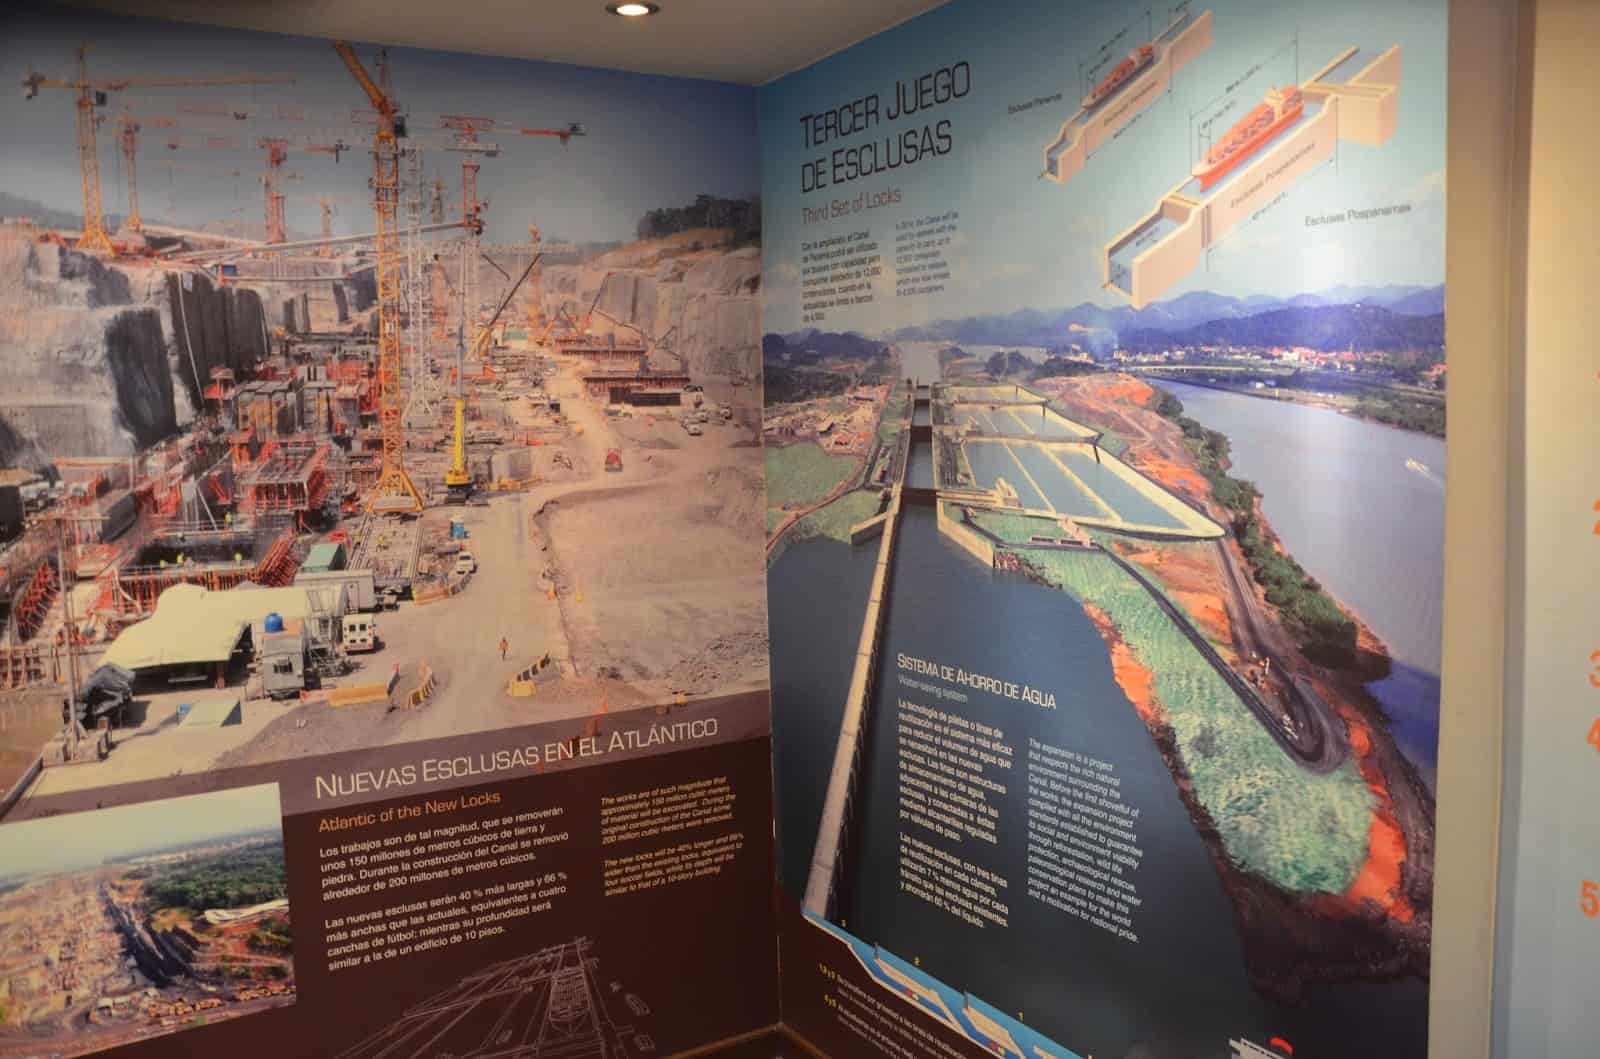 Museum at the Miraflores Locks on the Panama Canal